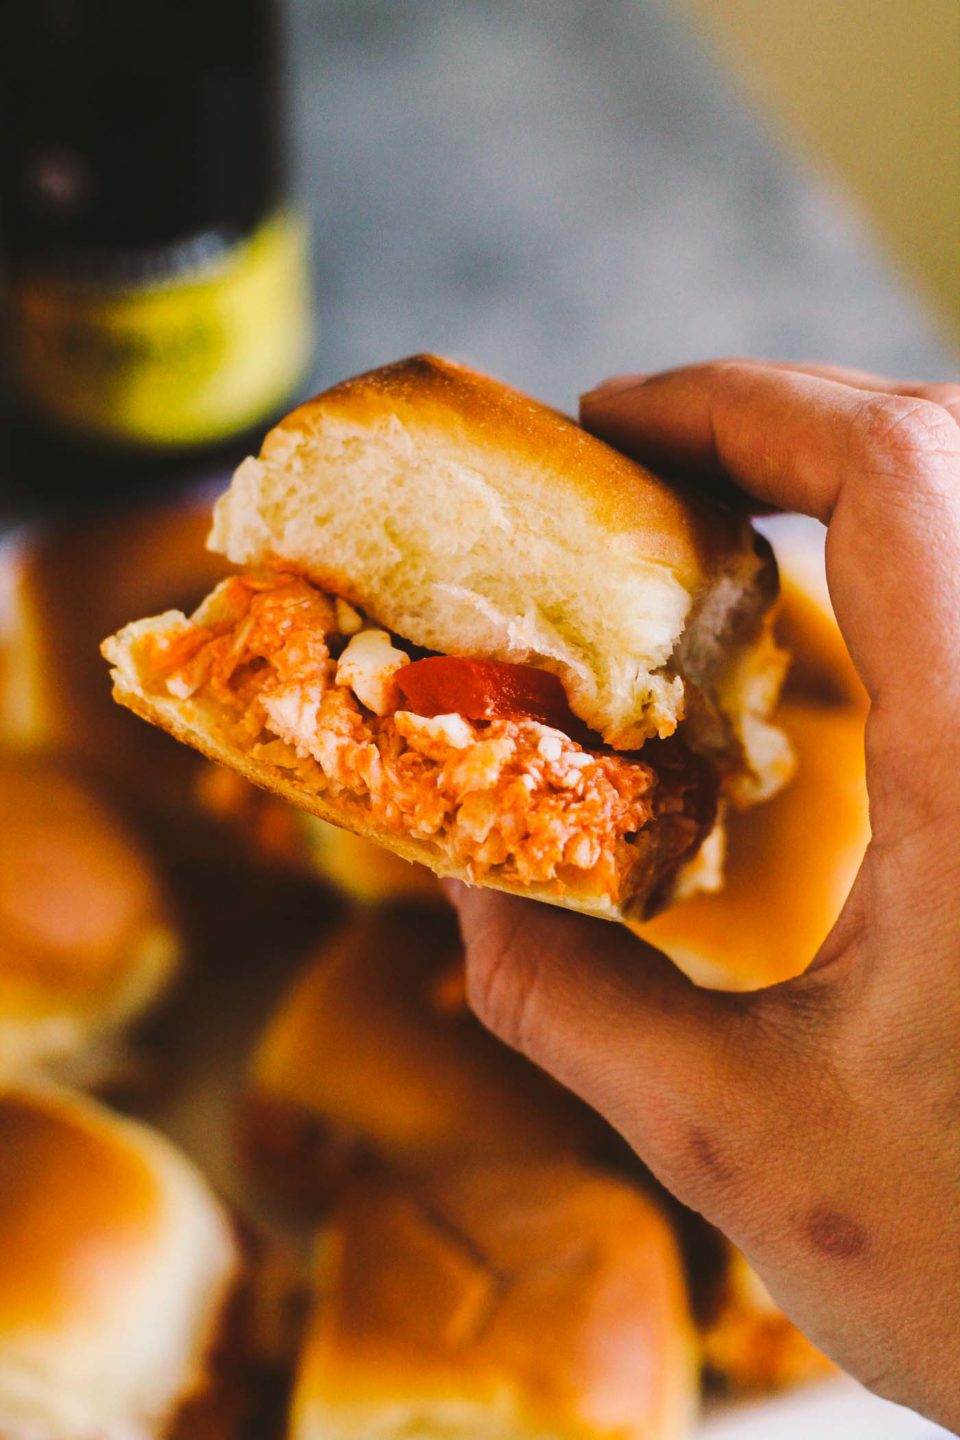 buffalo chicken sliders make the perfect game day snack & the best part is that they come together in 20 minutes from start to finish & feed a crowd of up to 12 people…it doesn’t get easier than that! | game day recipe, easy entertaining, buffalo chicken recipe, sliders recipe |